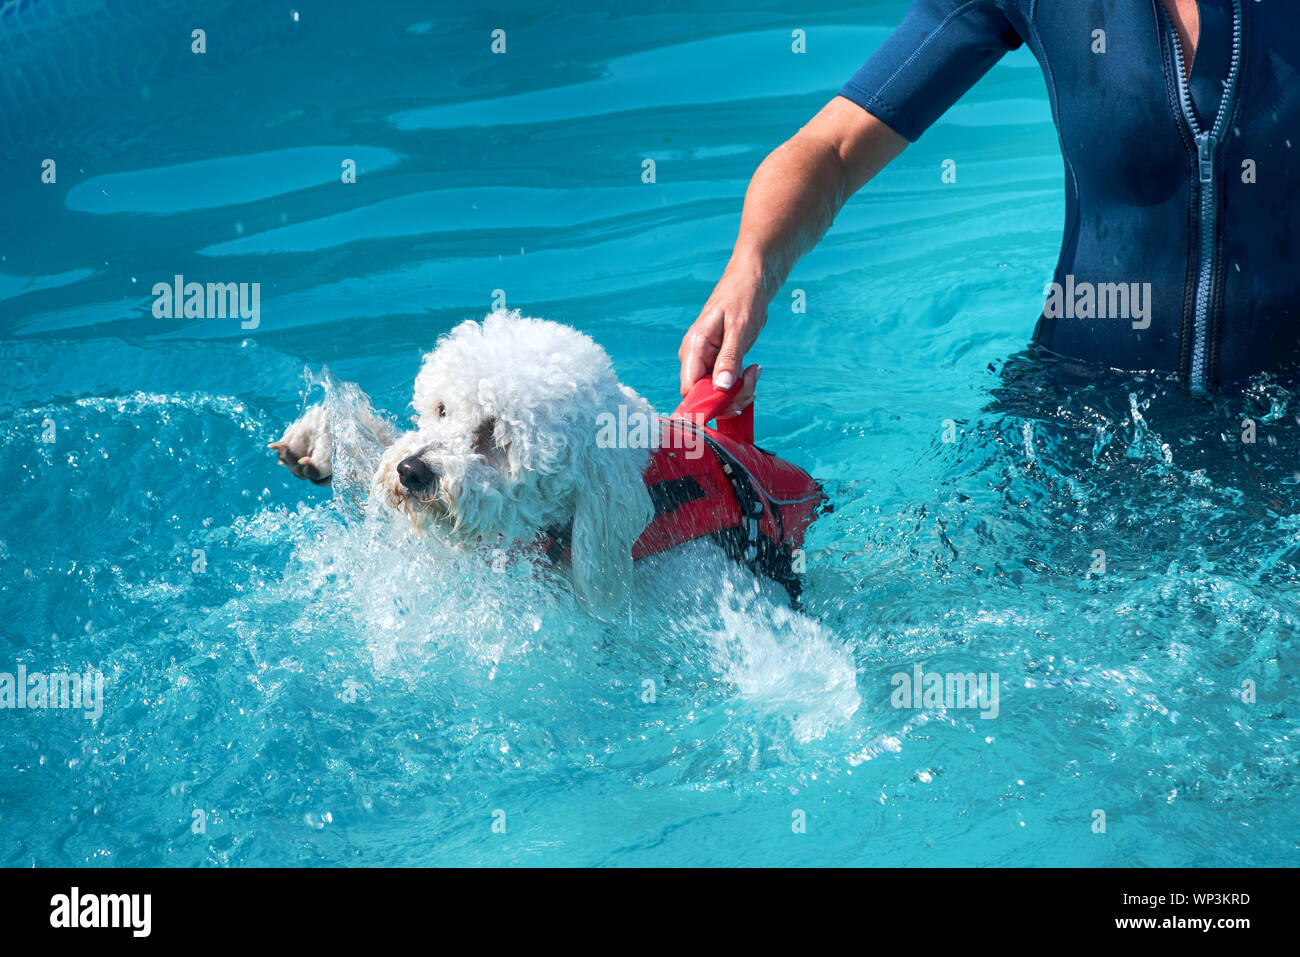 Person holding up a little curly haired white dog learning to swim in a pool by the handle on a red safety harness as it paddles with its legs in the Stock Photo